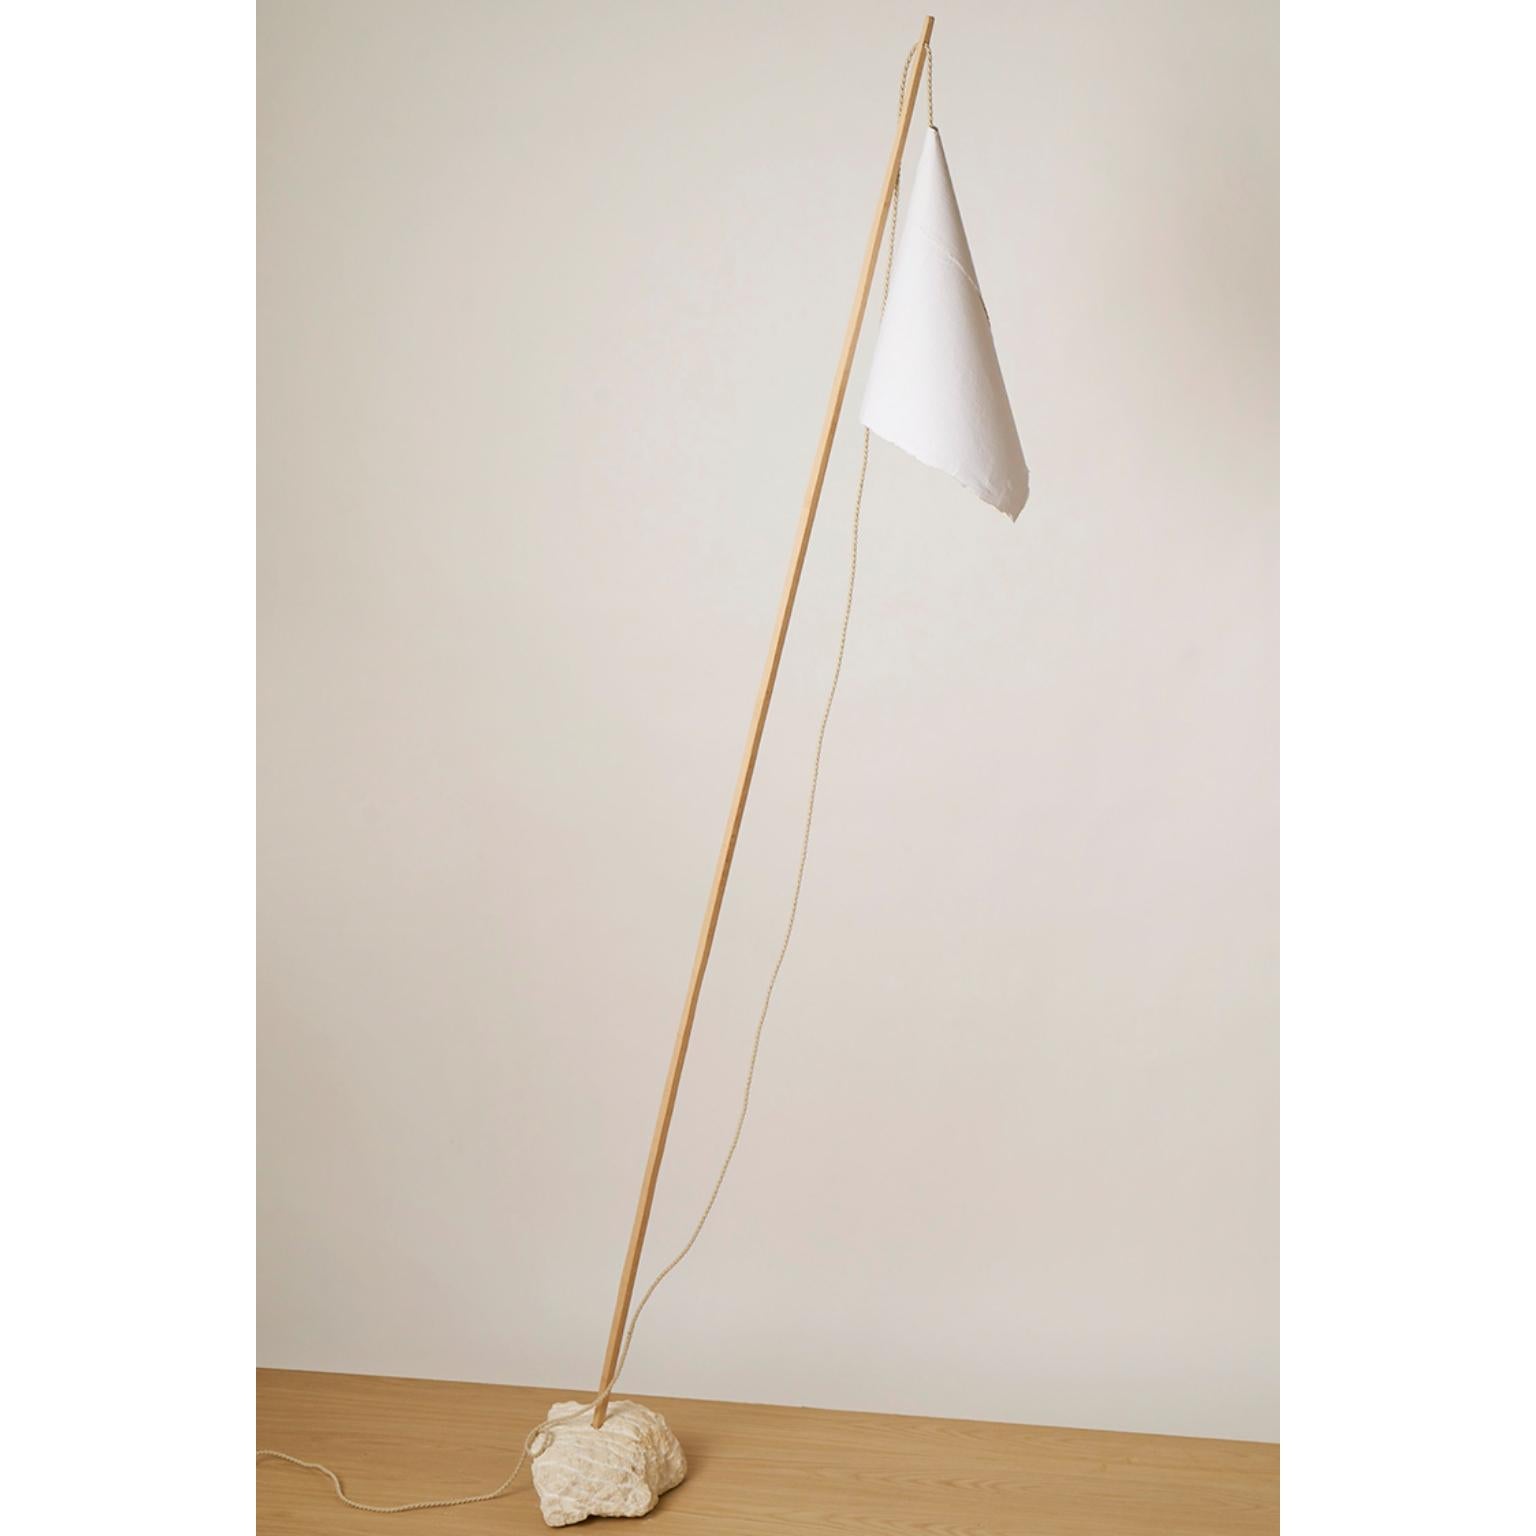 Ibiza lamp by Jean-Baptiste Van den Heede
Signed, Limited edition
Dimensions: H 45 cm
Materials: Stone, wood

Design floor and table lamp from the IBIZA collection. Hand-carved stone as well as the wooden shaft and its hand-made paper shade.